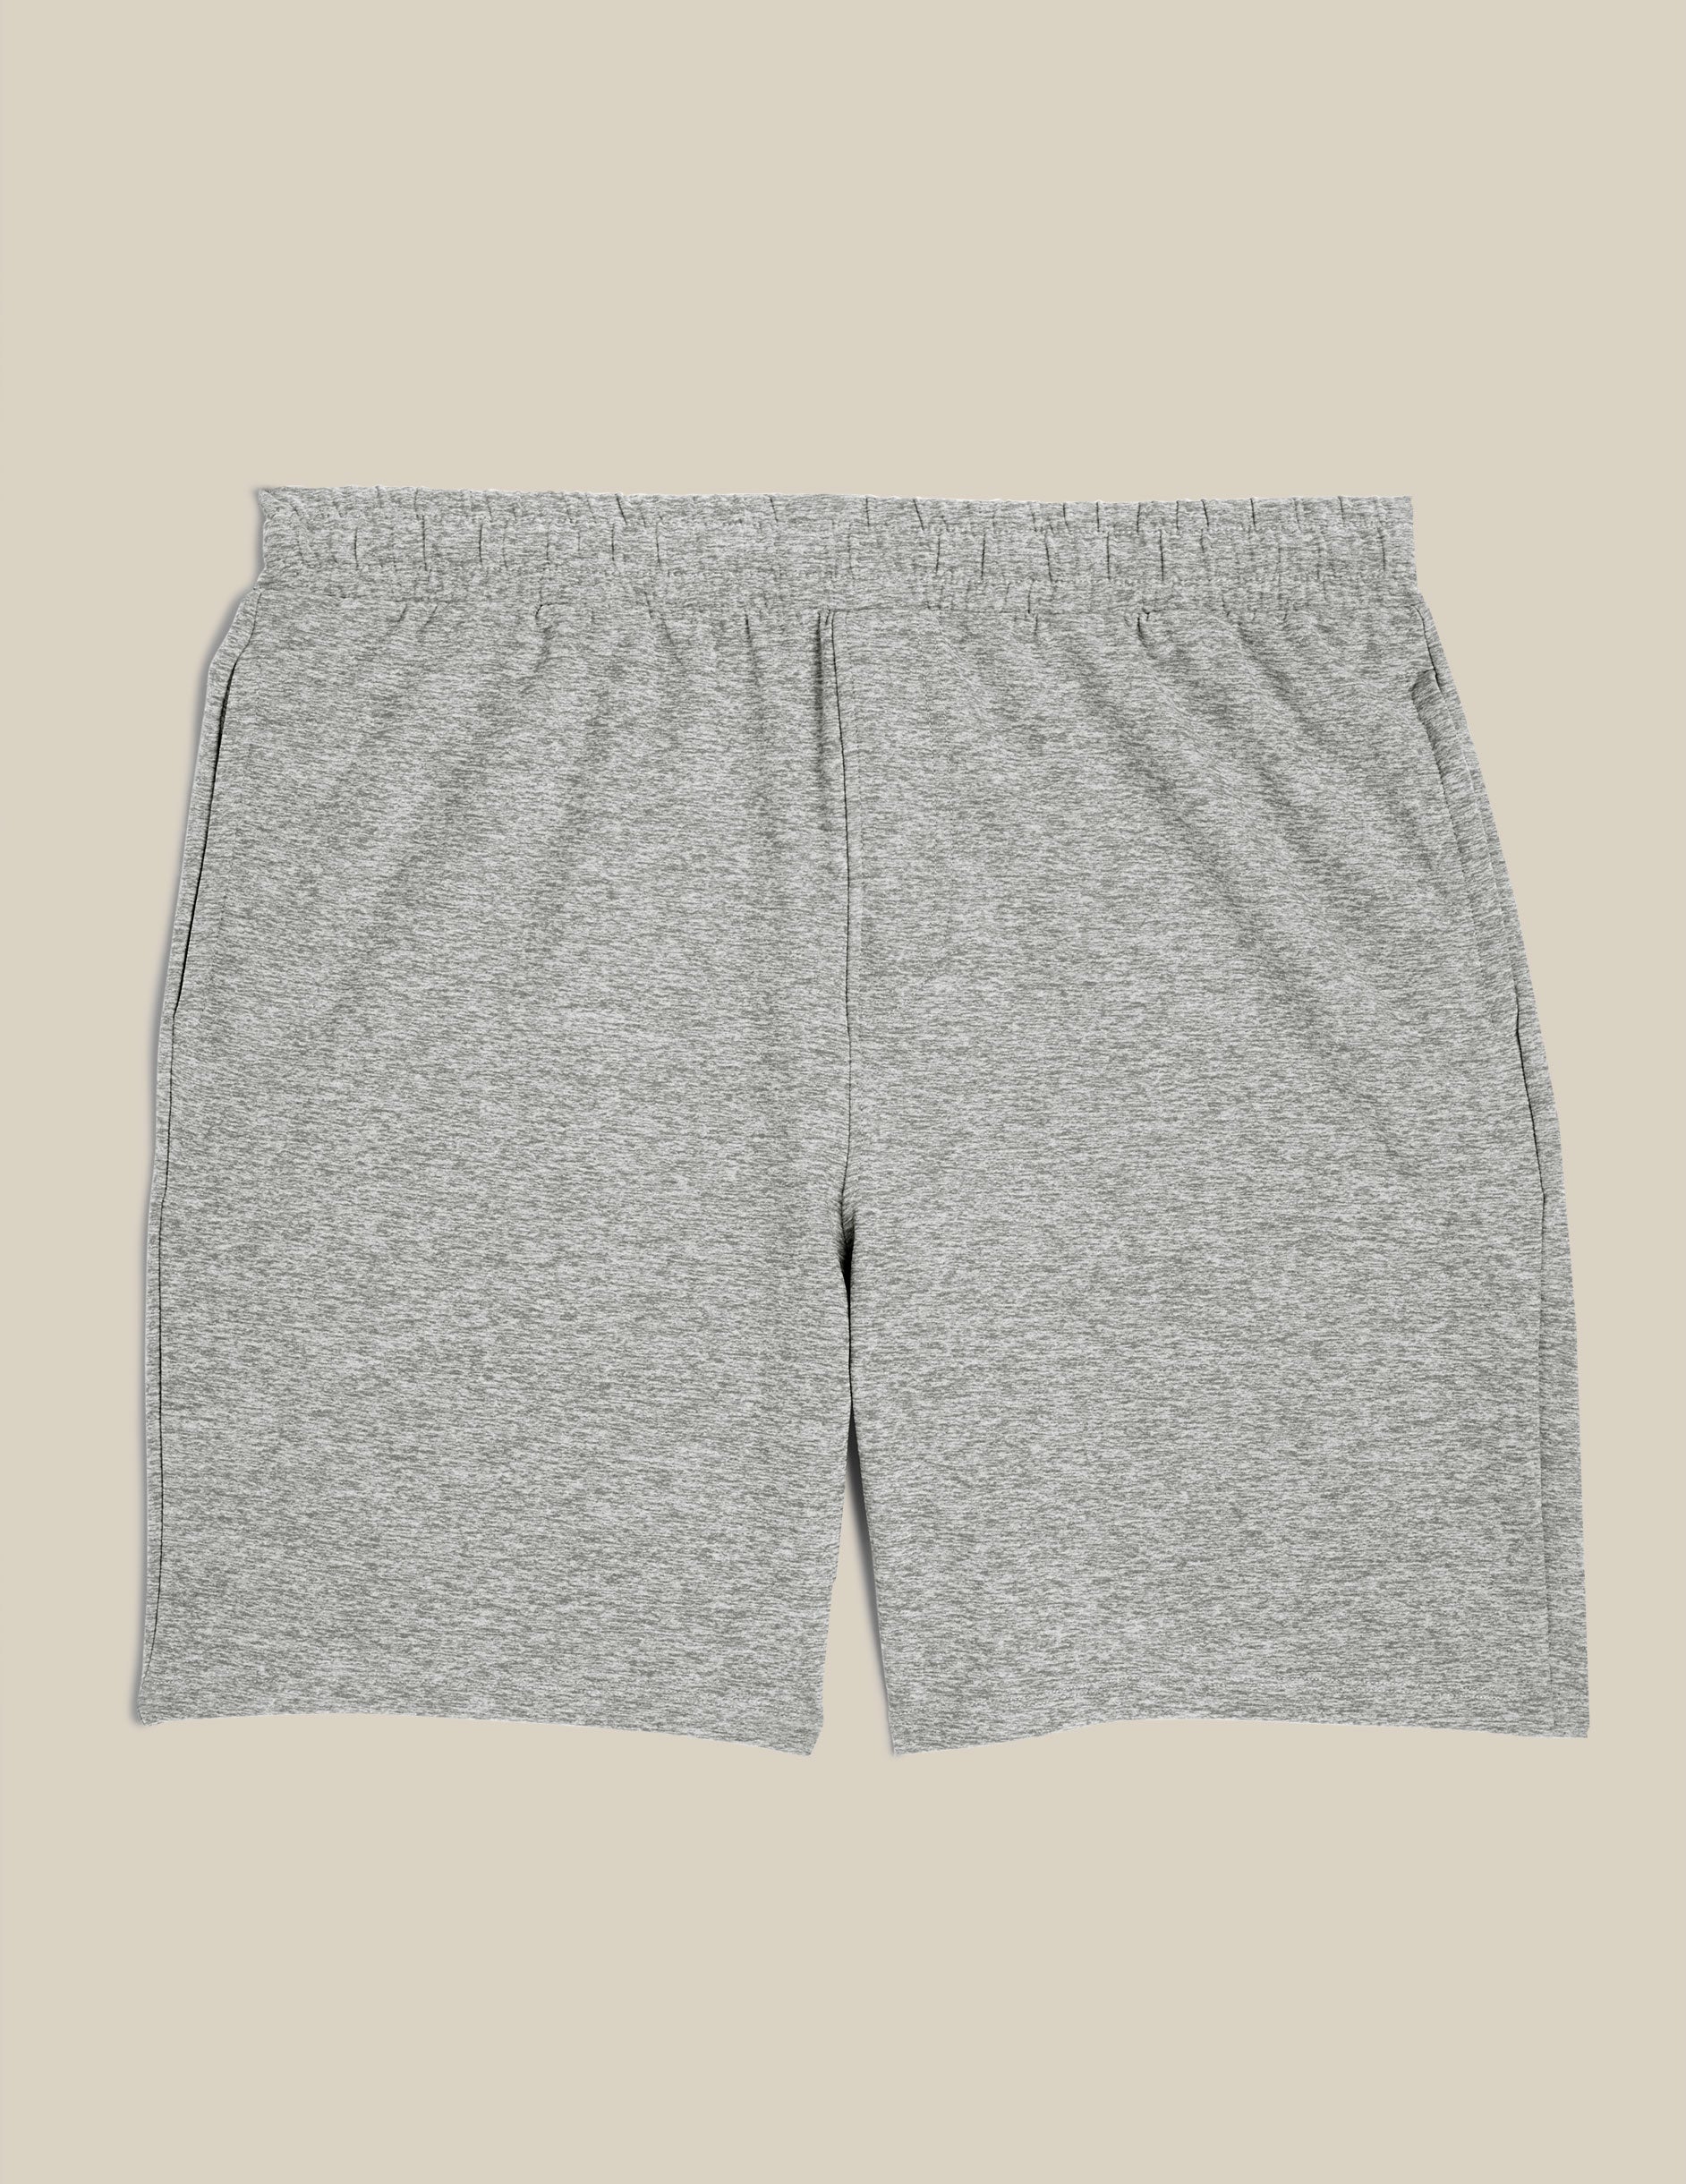 gray men's relaxed fit athleisure shorts with pockets.